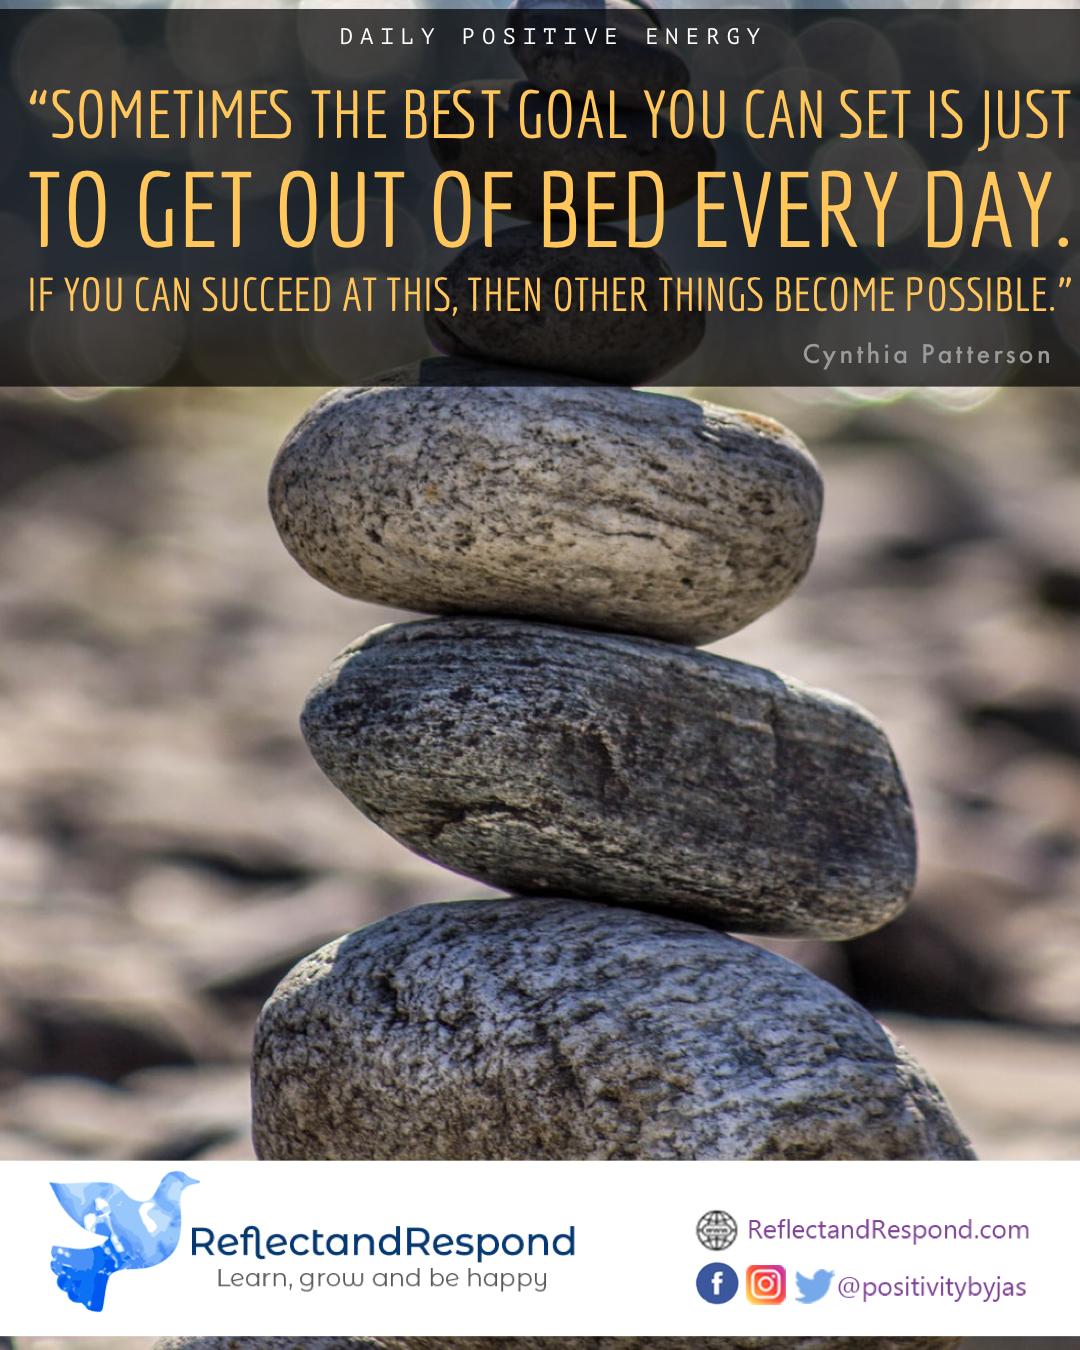 Sometimes the best goal you can set is to get out of bed